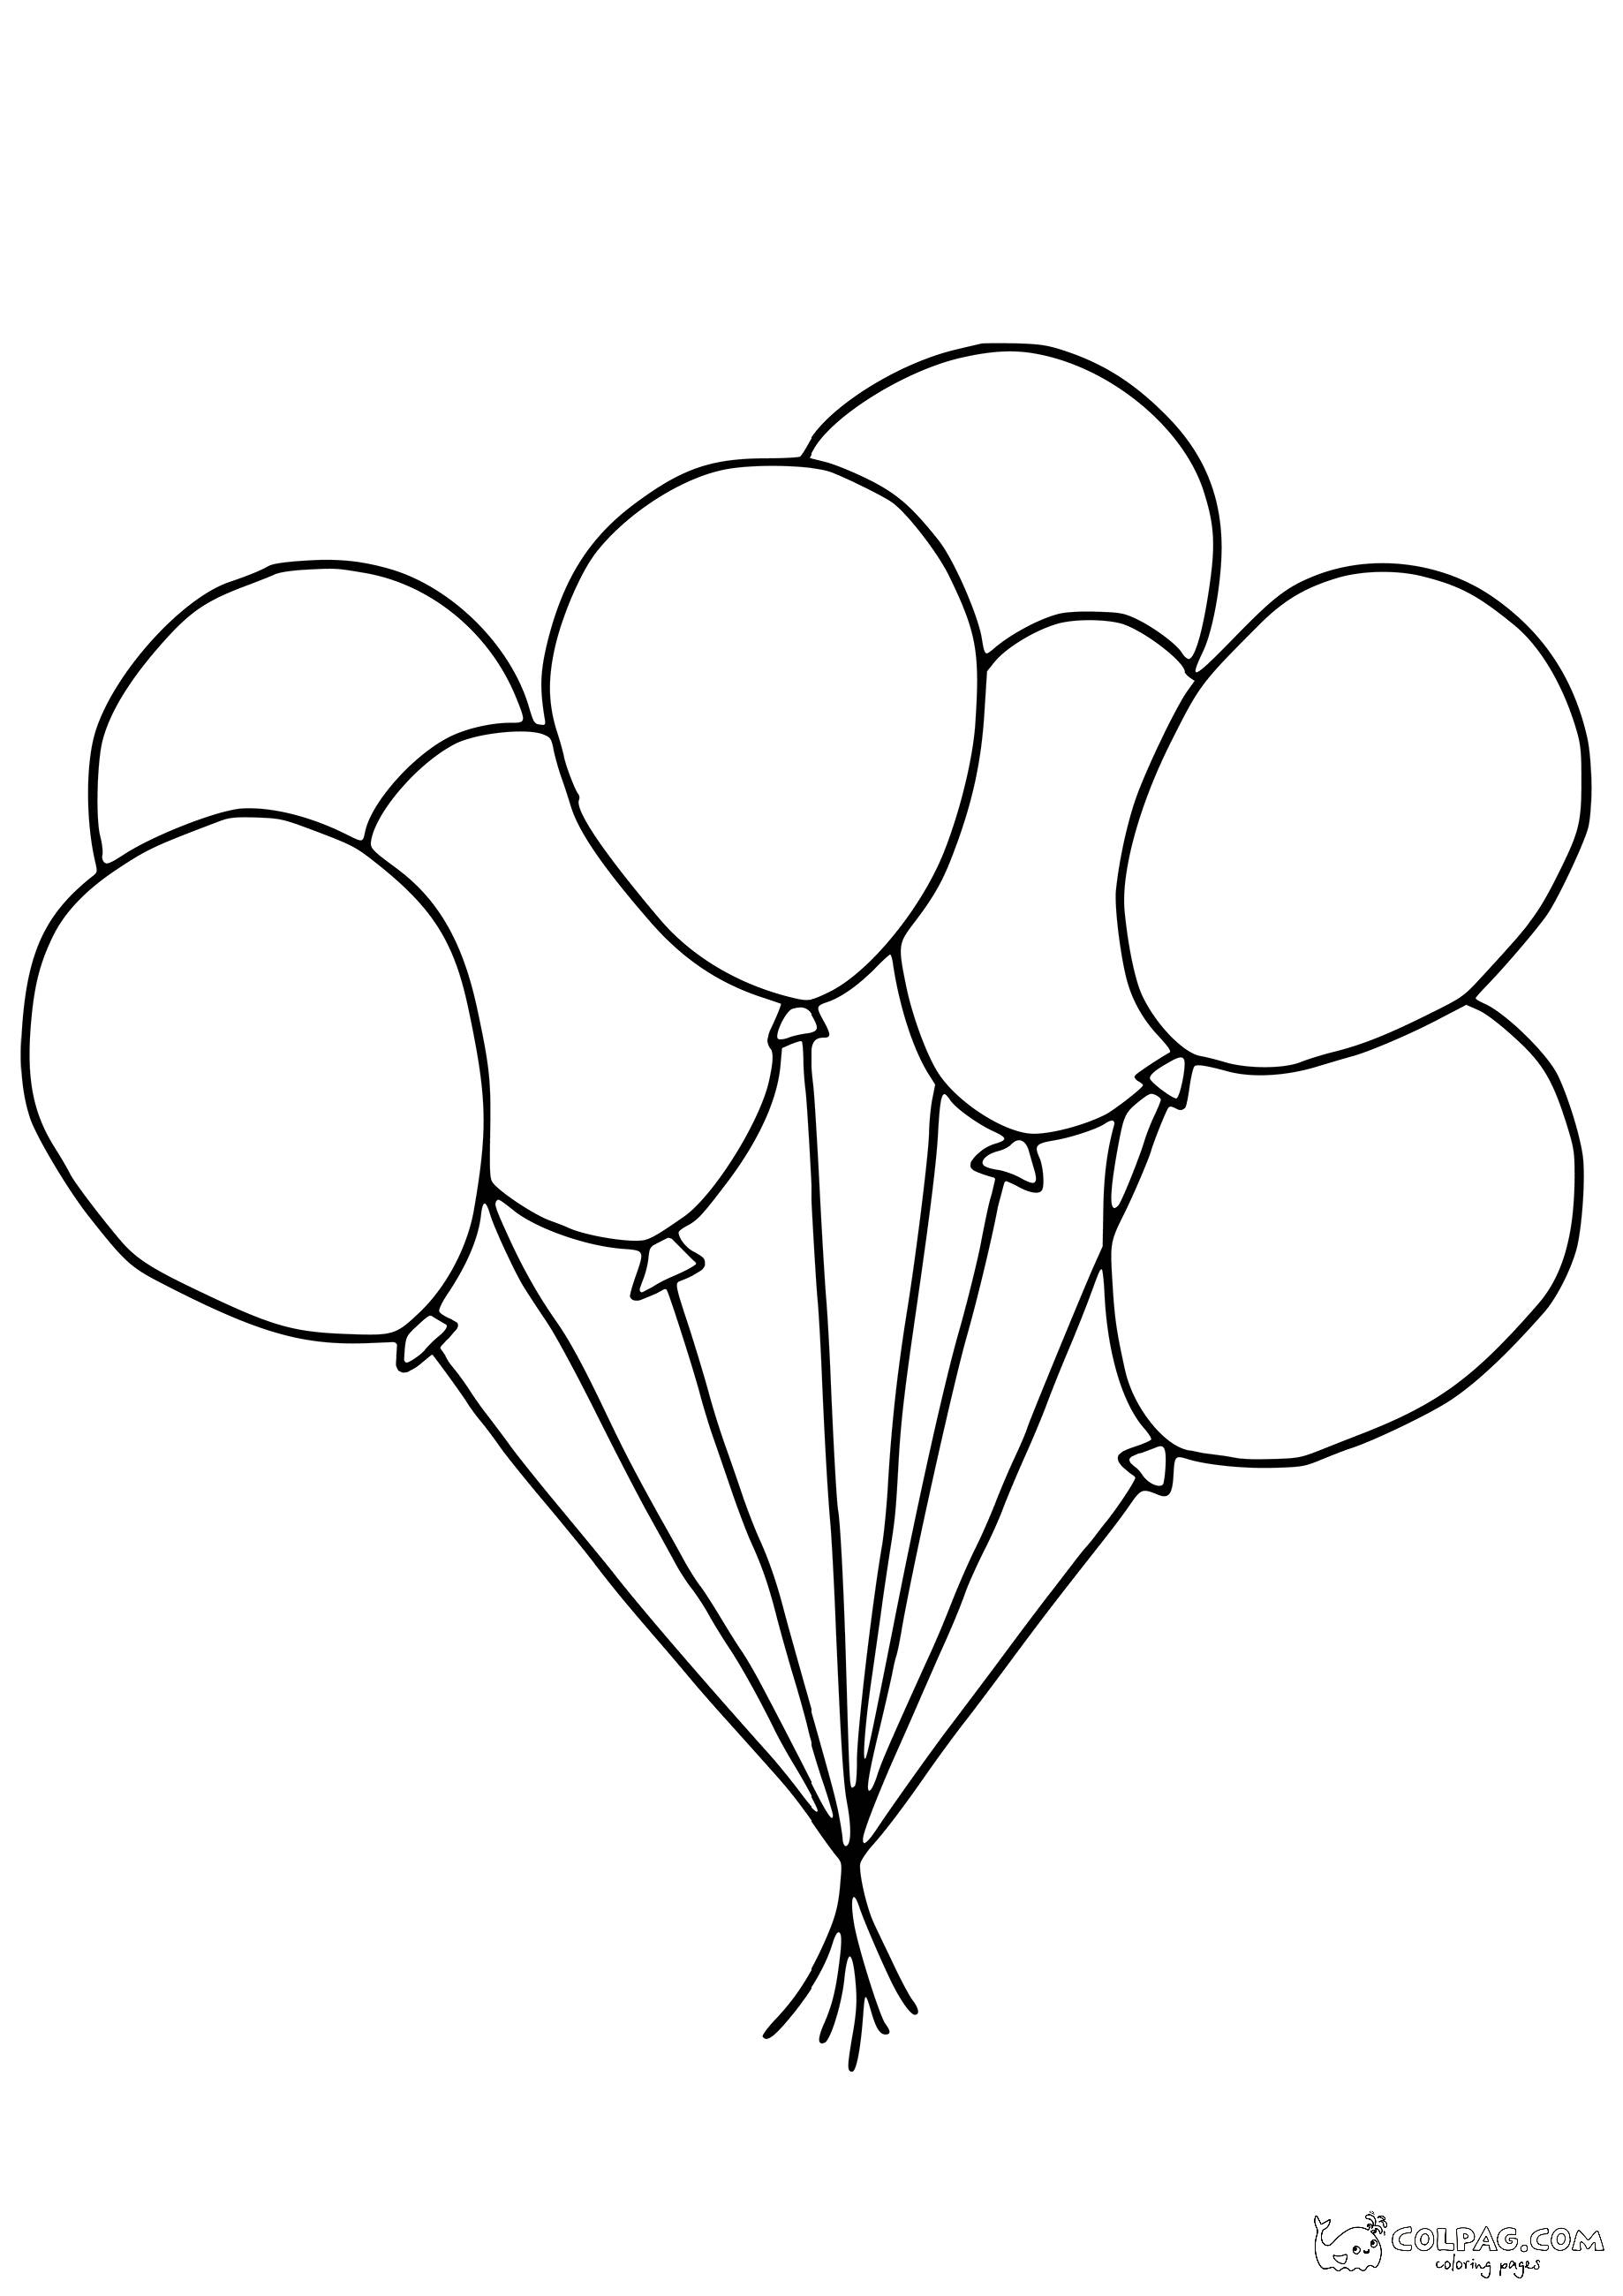 33-baloons-stuck-together-coloring-page-colpag-33